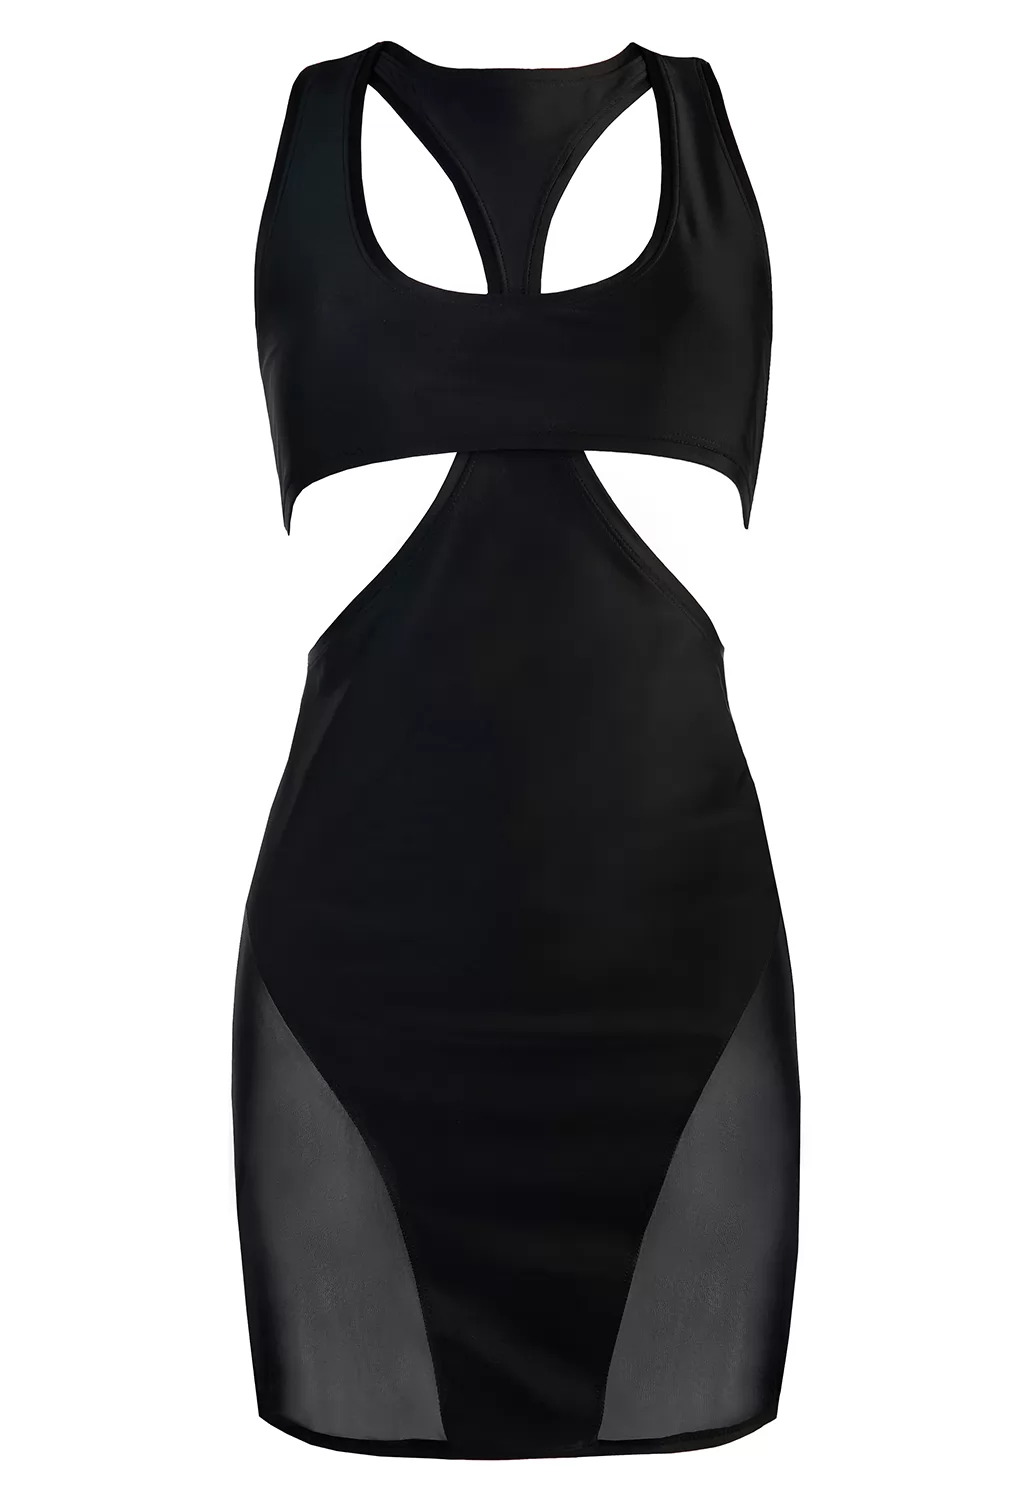 Sexy black dress with cut out